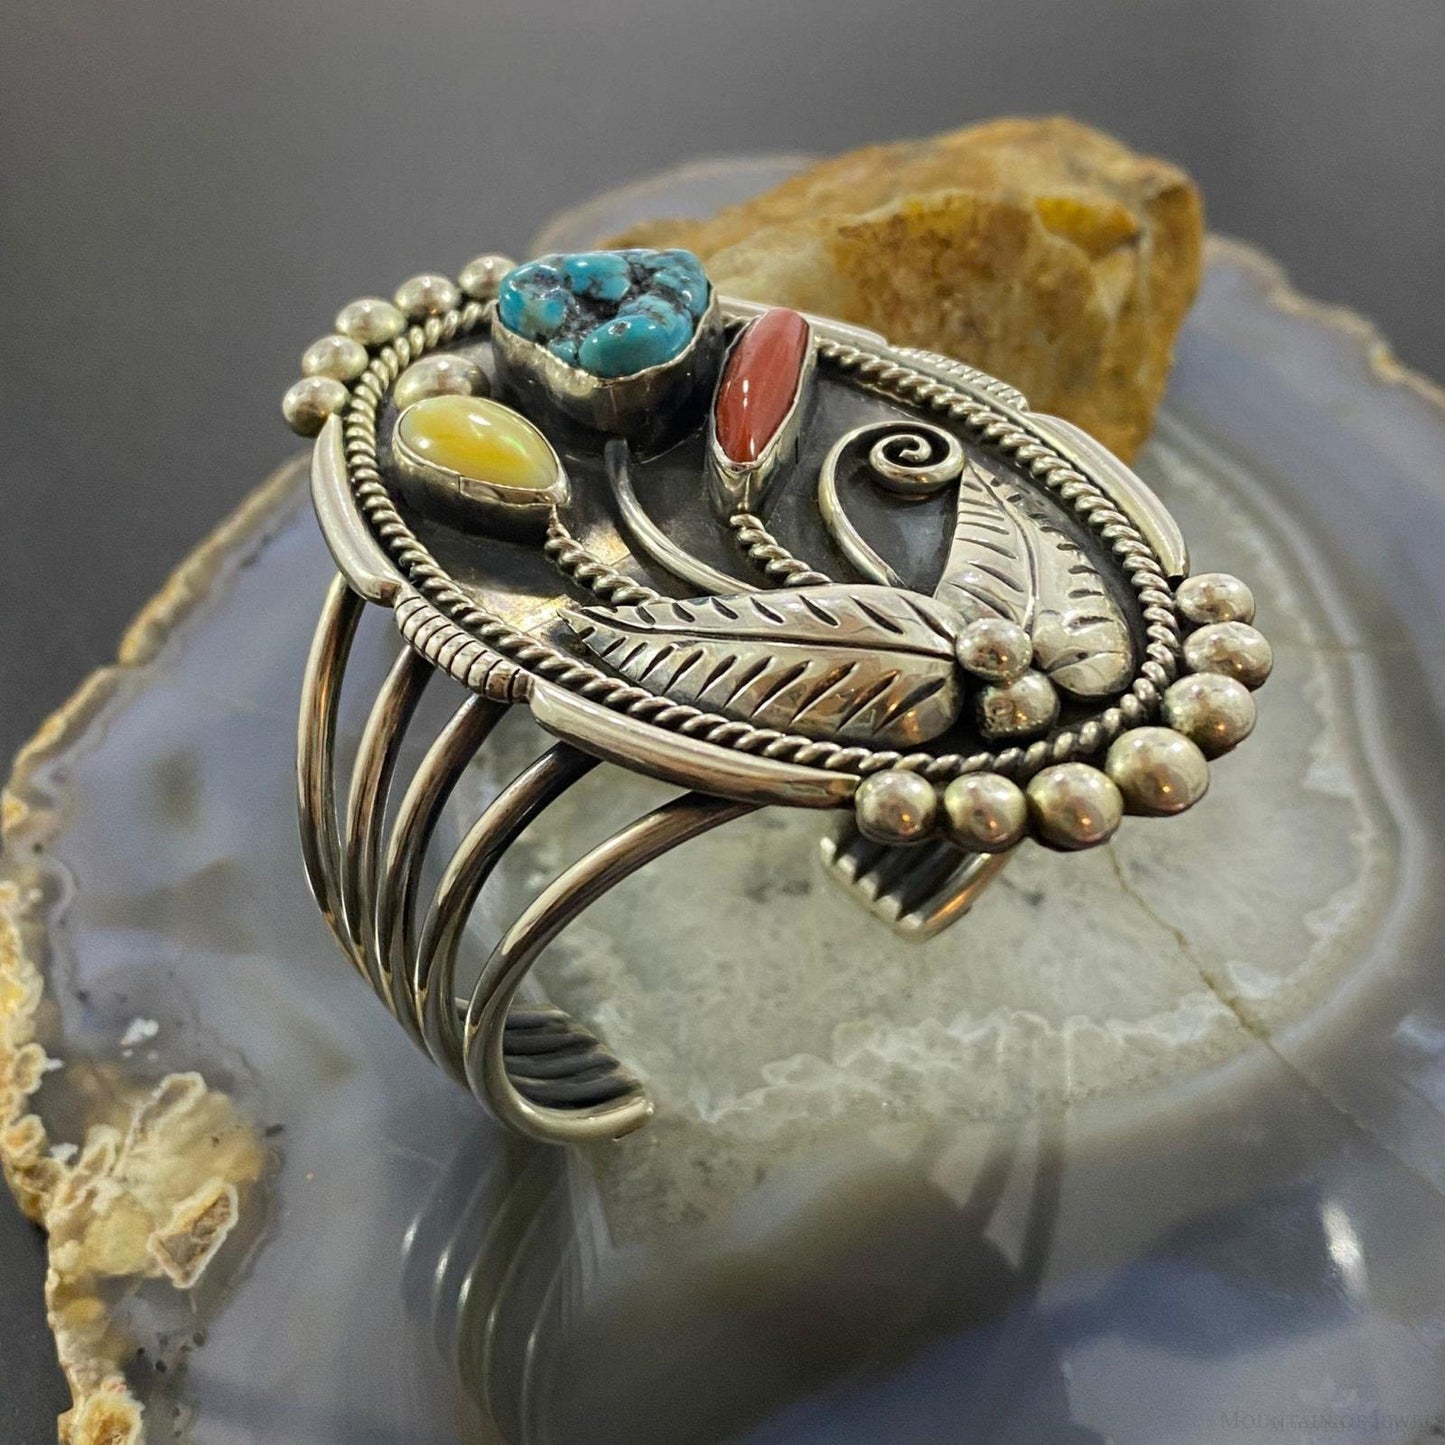 Vintage Native American Silver Kingman Turquoise, Coral, MOP Decorated Bracelet For Women